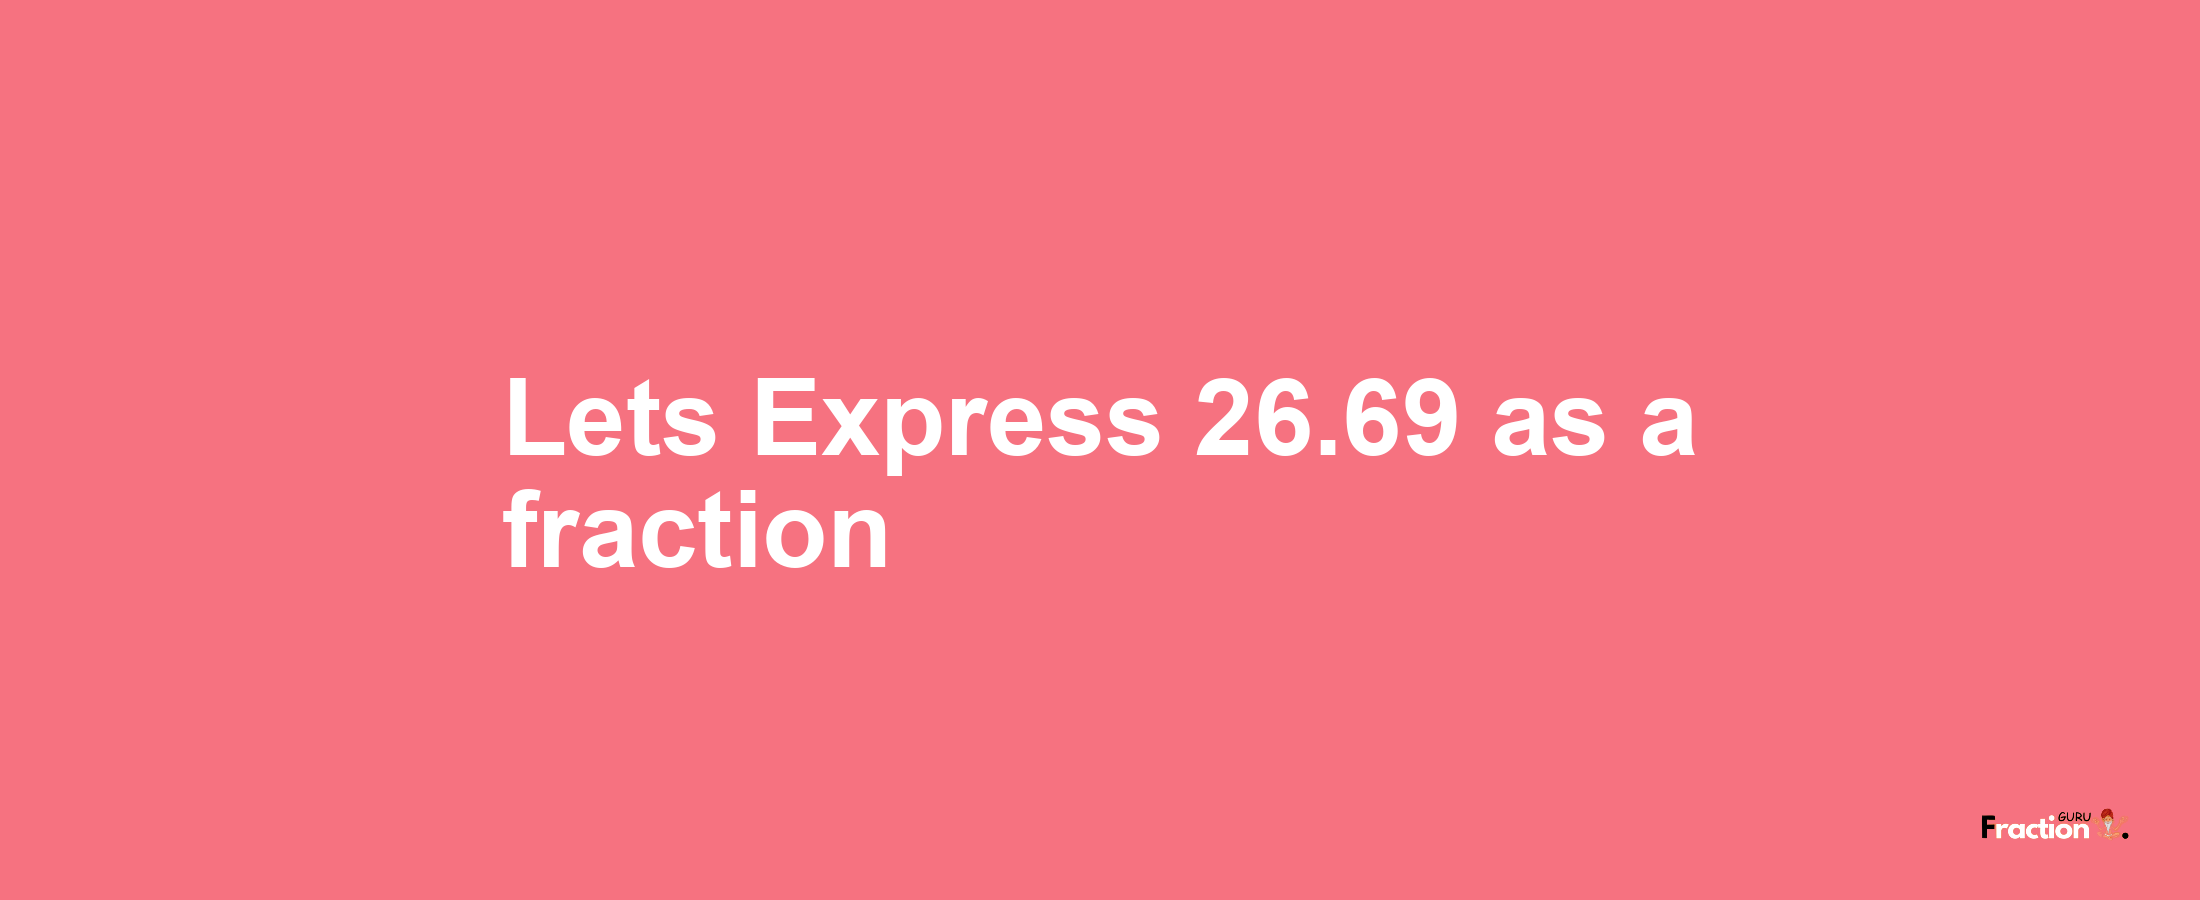 Lets Express 26.69 as afraction